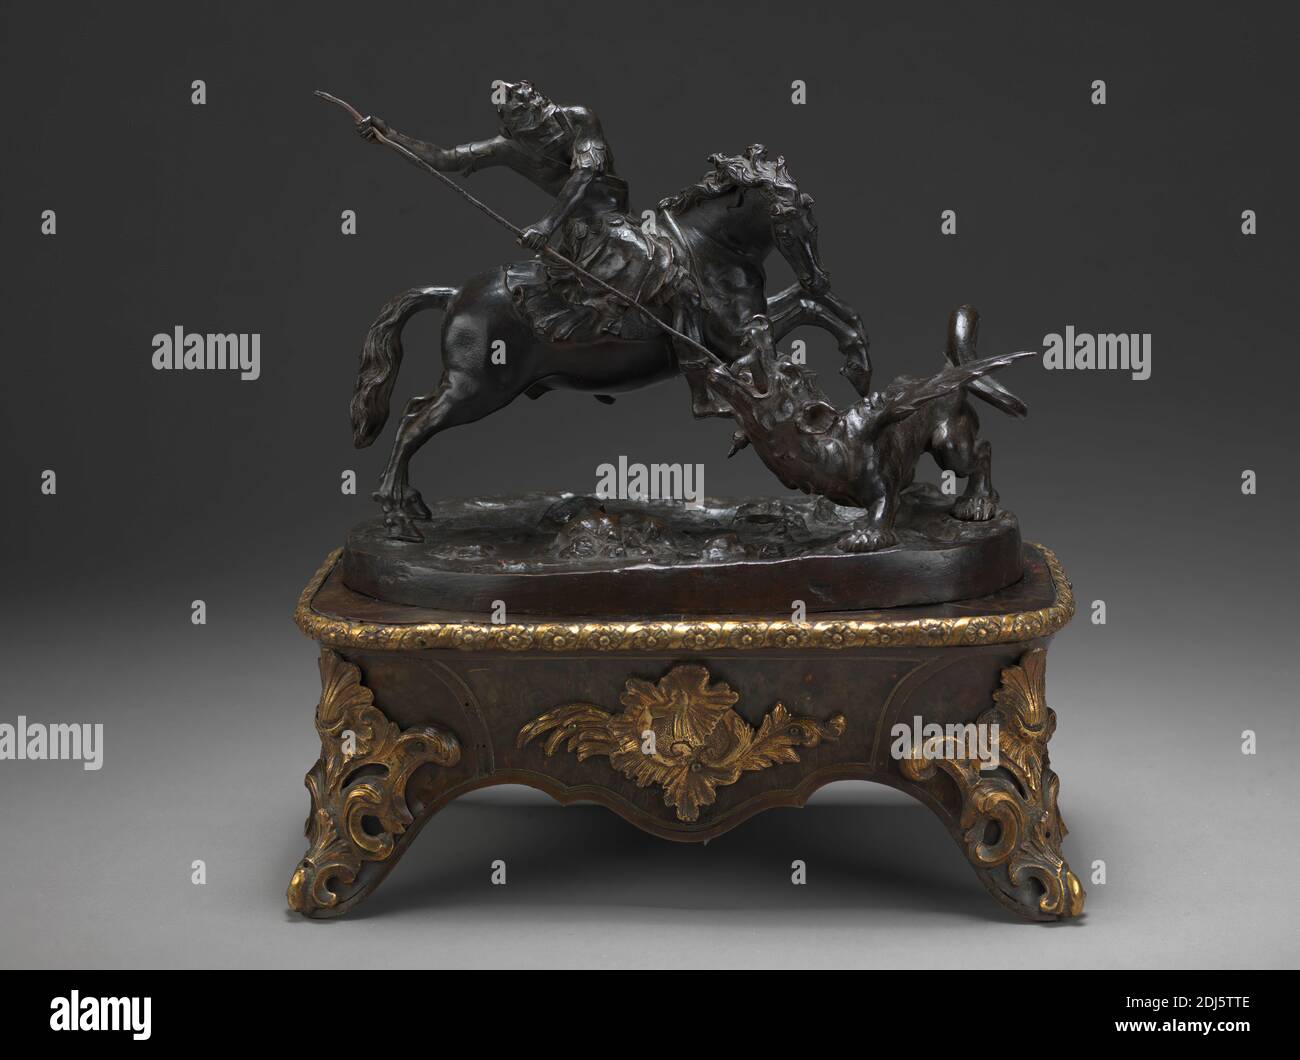 St. George and the Dragon, Francesco Fanelli, born 1577, Italian, active in Britain (from ca. 1632), ca. 1635, Bronze, on a later wooden base with tortoiseshell veneer and gilt bronze mounts, Overall: 11 1/2 × 11 1/2 × 8 inches (29.2 × 29.2 × 20.3 cm), dragon, religious and mythological subject, spear, St. George and the dragon Stock Photo